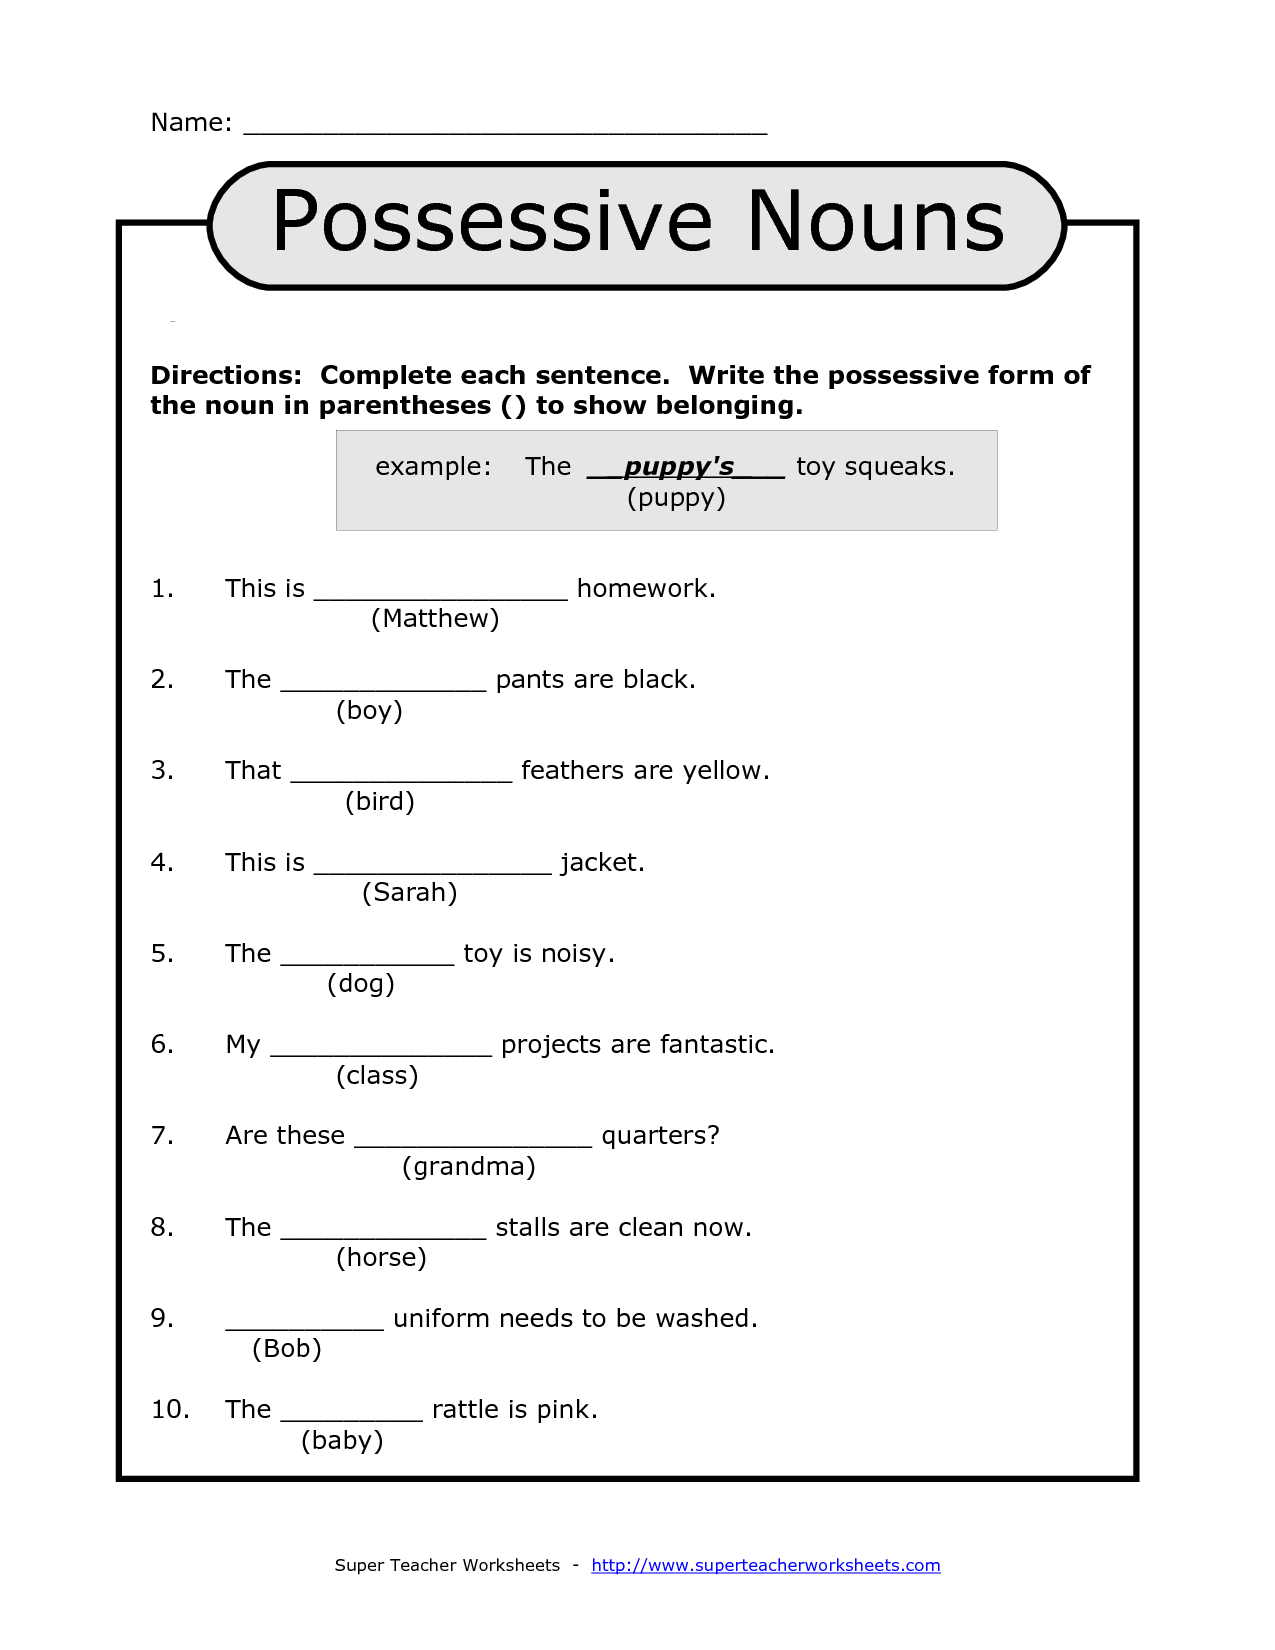 18-best-images-of-possessive-nouns-printable-worksheets-plural-possessive-nouns-worksheets